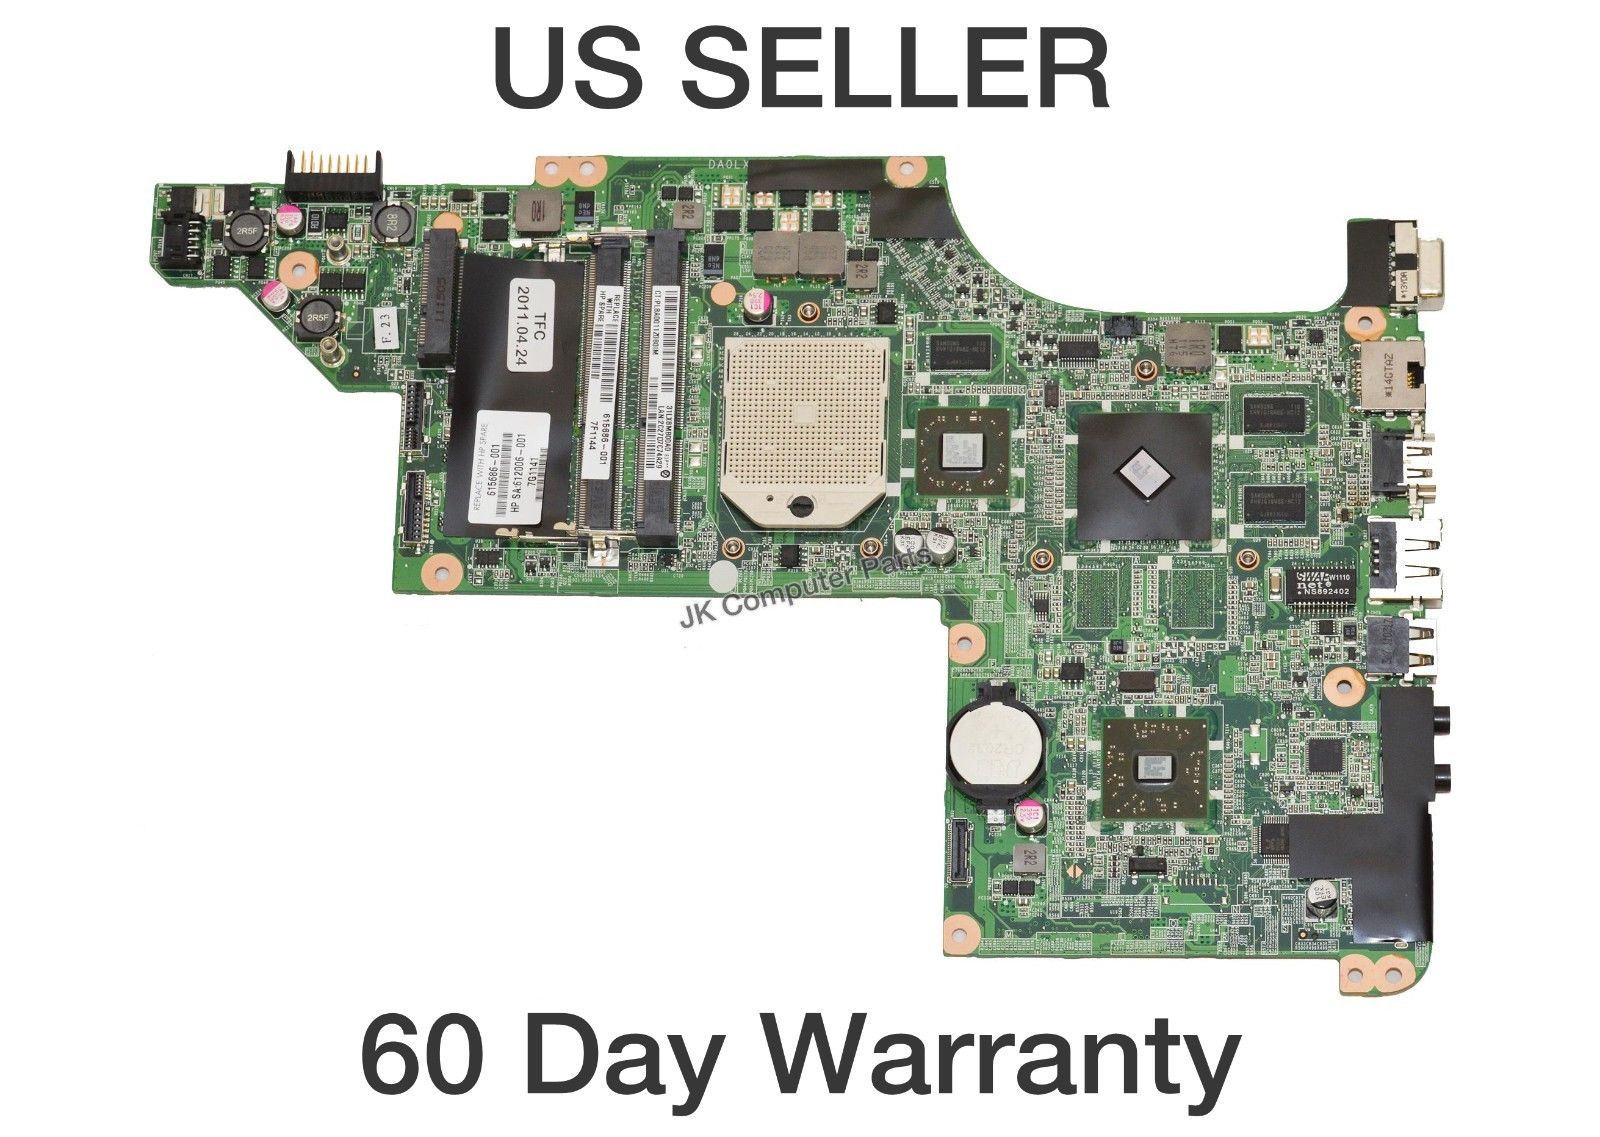 HP DV7-4000 DV7-4051NR, DV7-4069WM, DV7-4169WM AMD Laptop Motherboard s1 This motherboard is pulled from a n